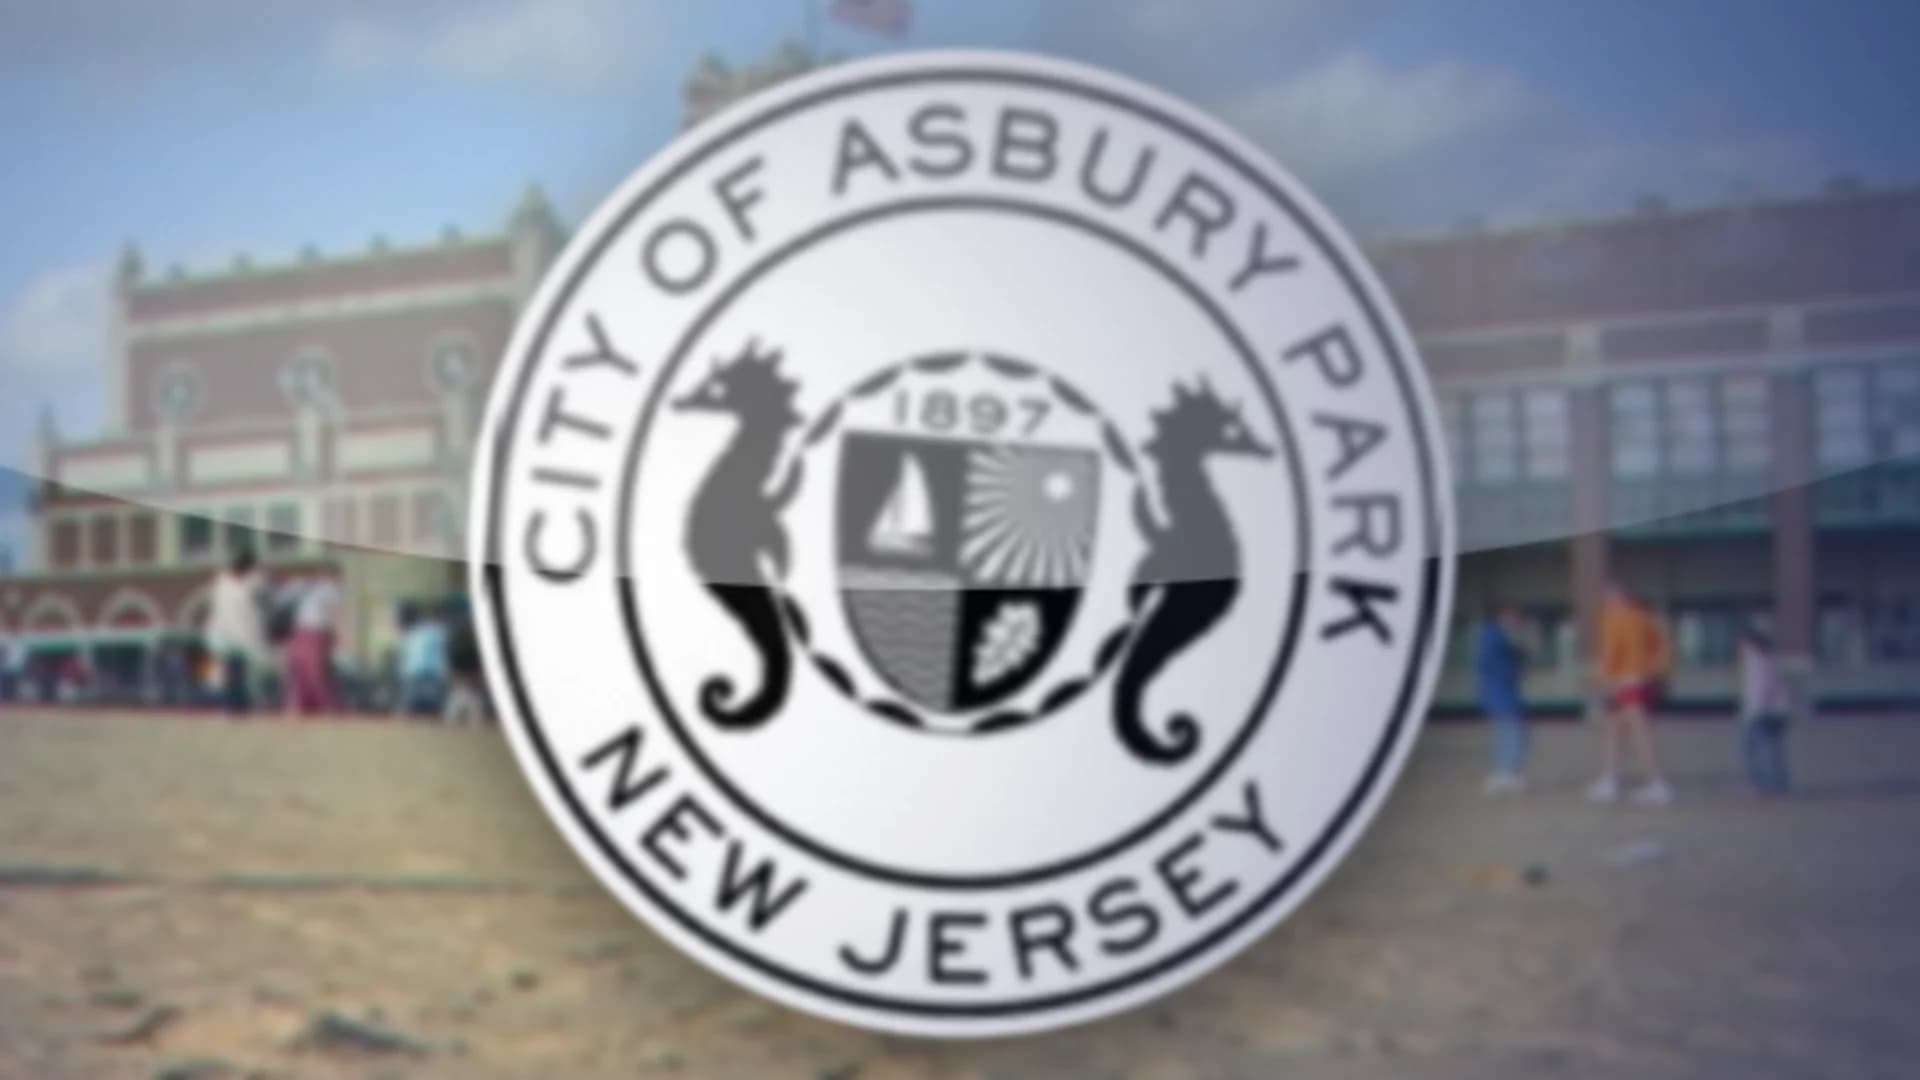 Asbury Park votes to allow indoor dining, despite executive order banning it